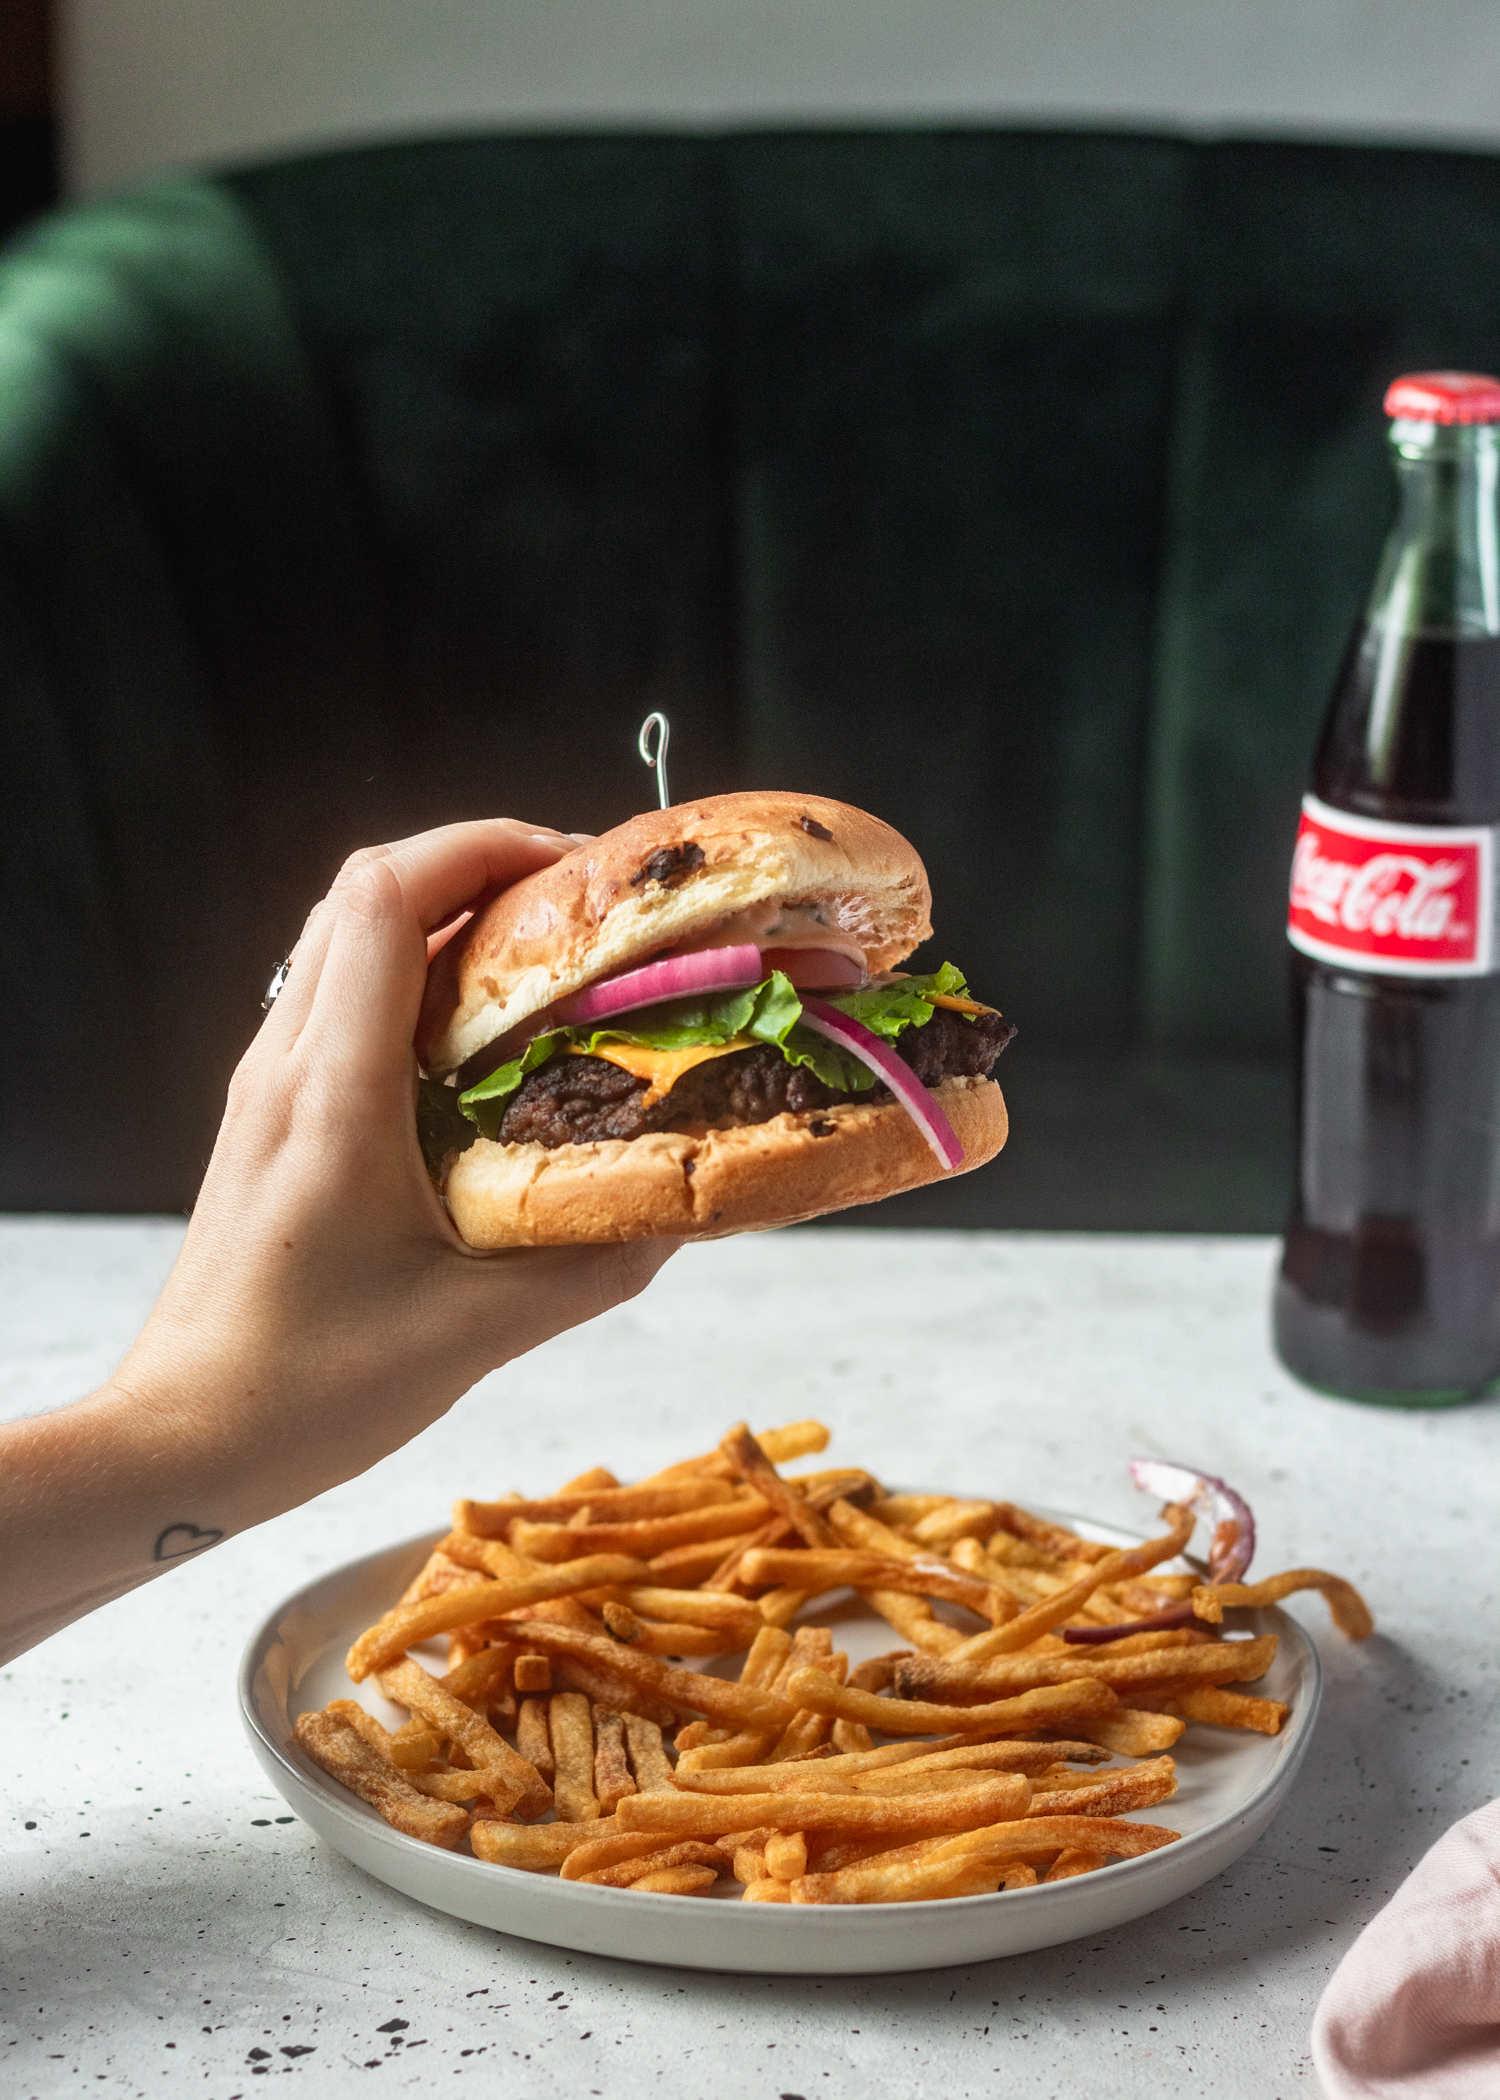 A woman's hand holding a burger, with a white table and green velvet booth in the background. On the table is a plate of fries and a bottle of Coke.